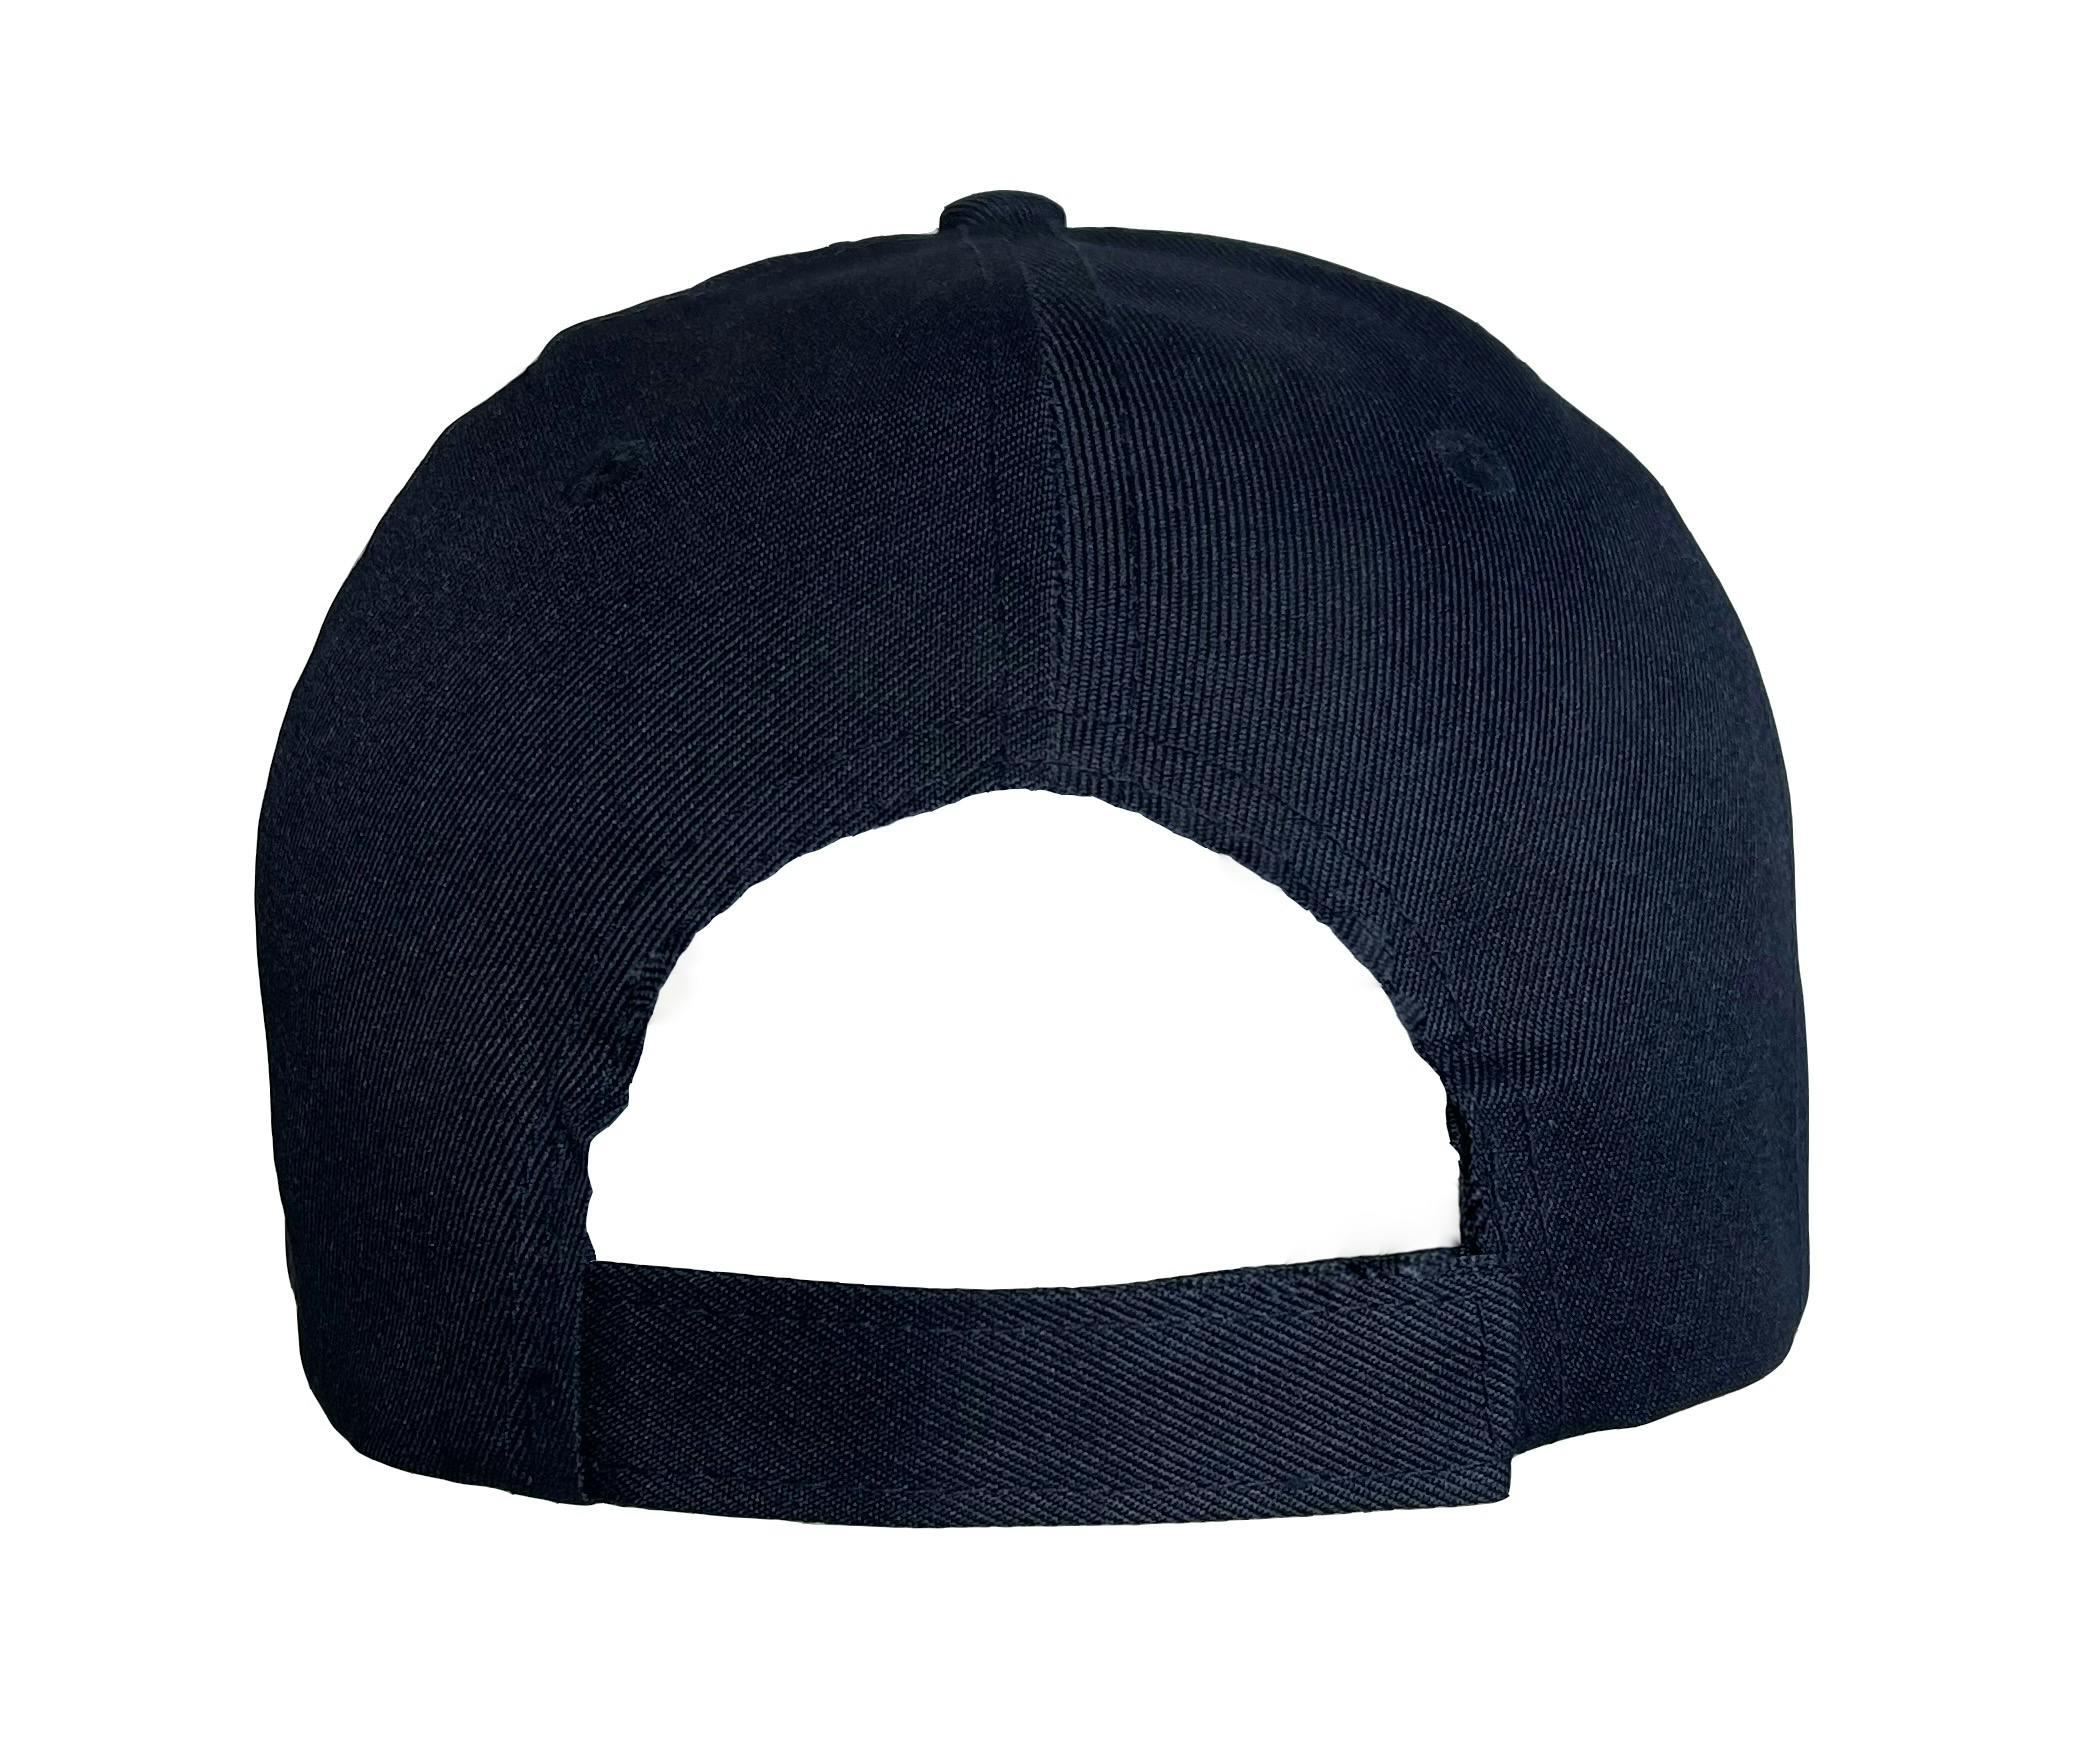 6 PANEL POLY TWILL CAP WITH VELCRO CLOSURE